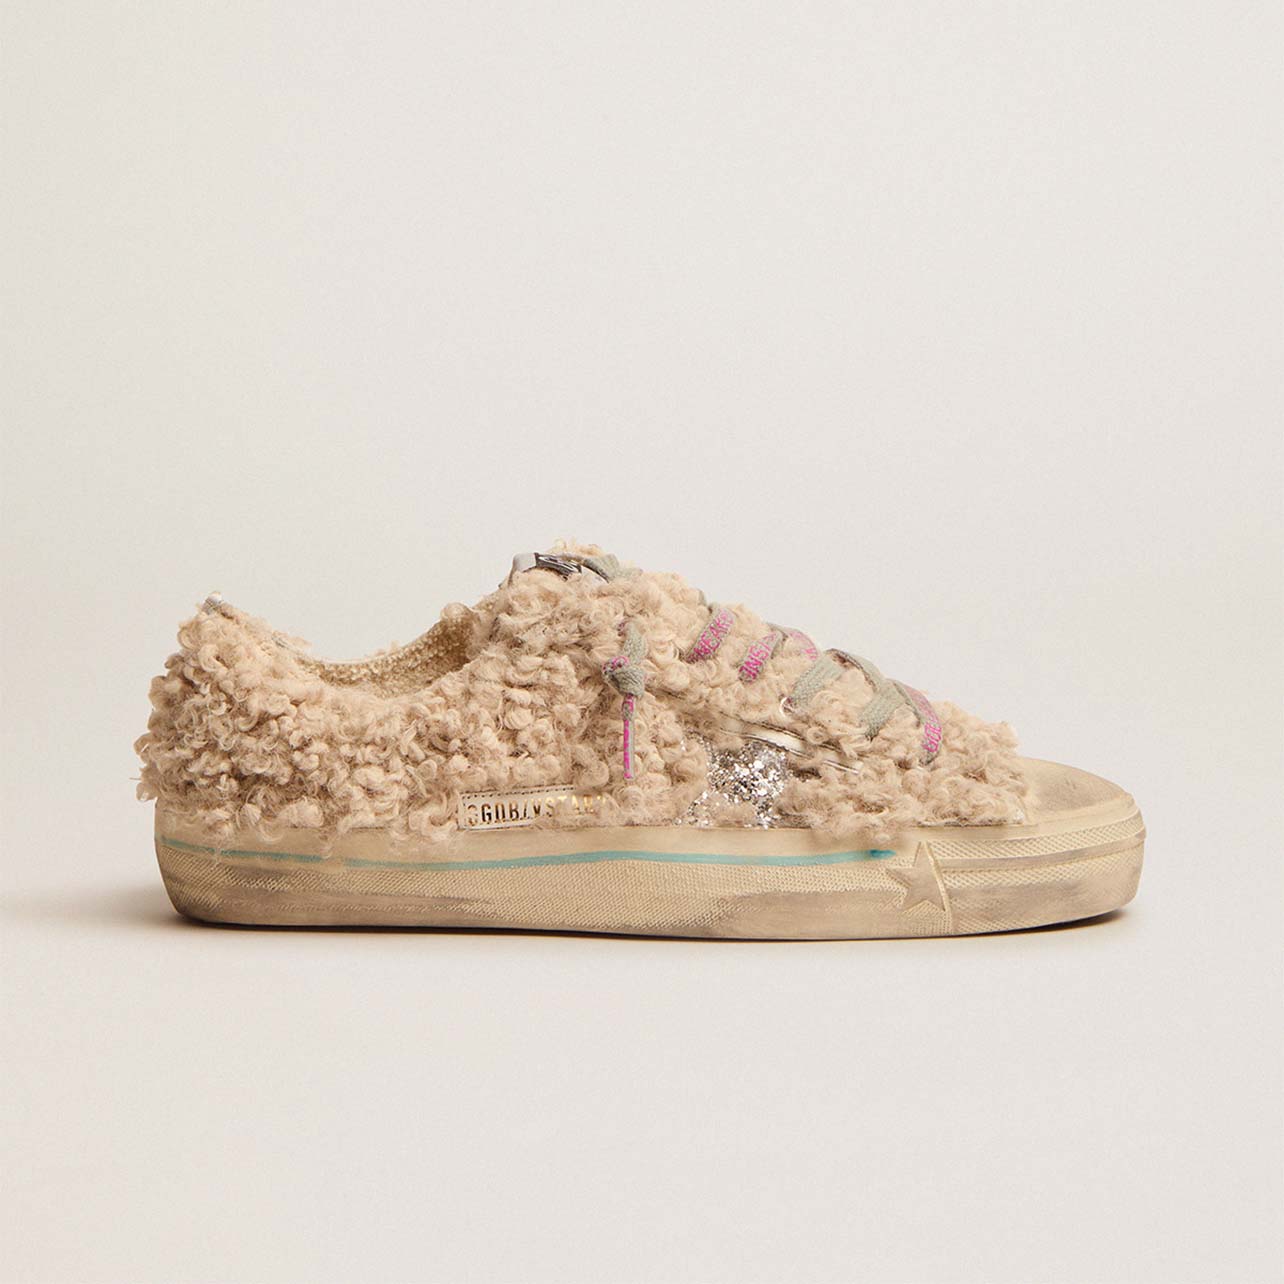 Golden Goose sneaker with pink sherpa and silver sequin star